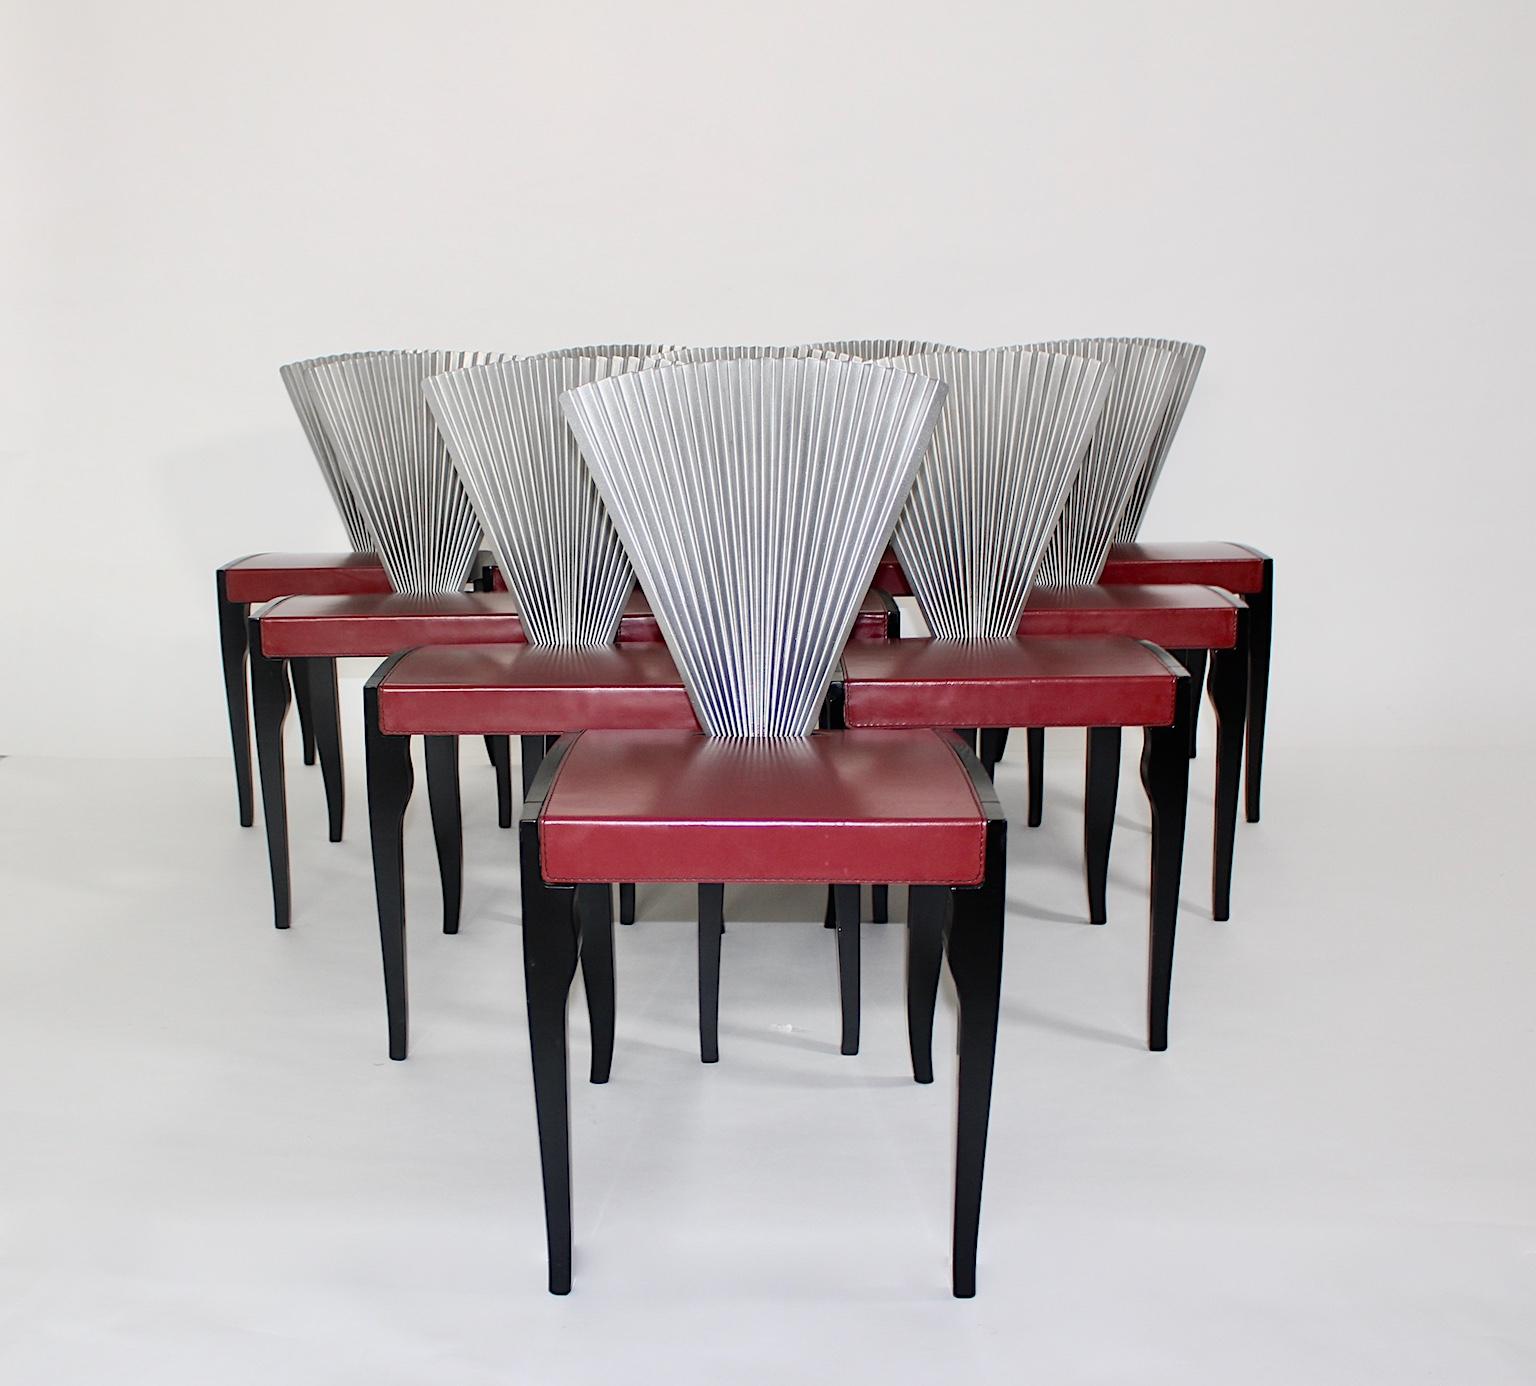 Post-modern style set of ten vintage dining chairs of chairs from beech, leather and metal in the colors red, black and silver designed and made in Italy, 1980s.
Wonderful ten vintage dining chairs, which show black lacquered beechwood frame with a